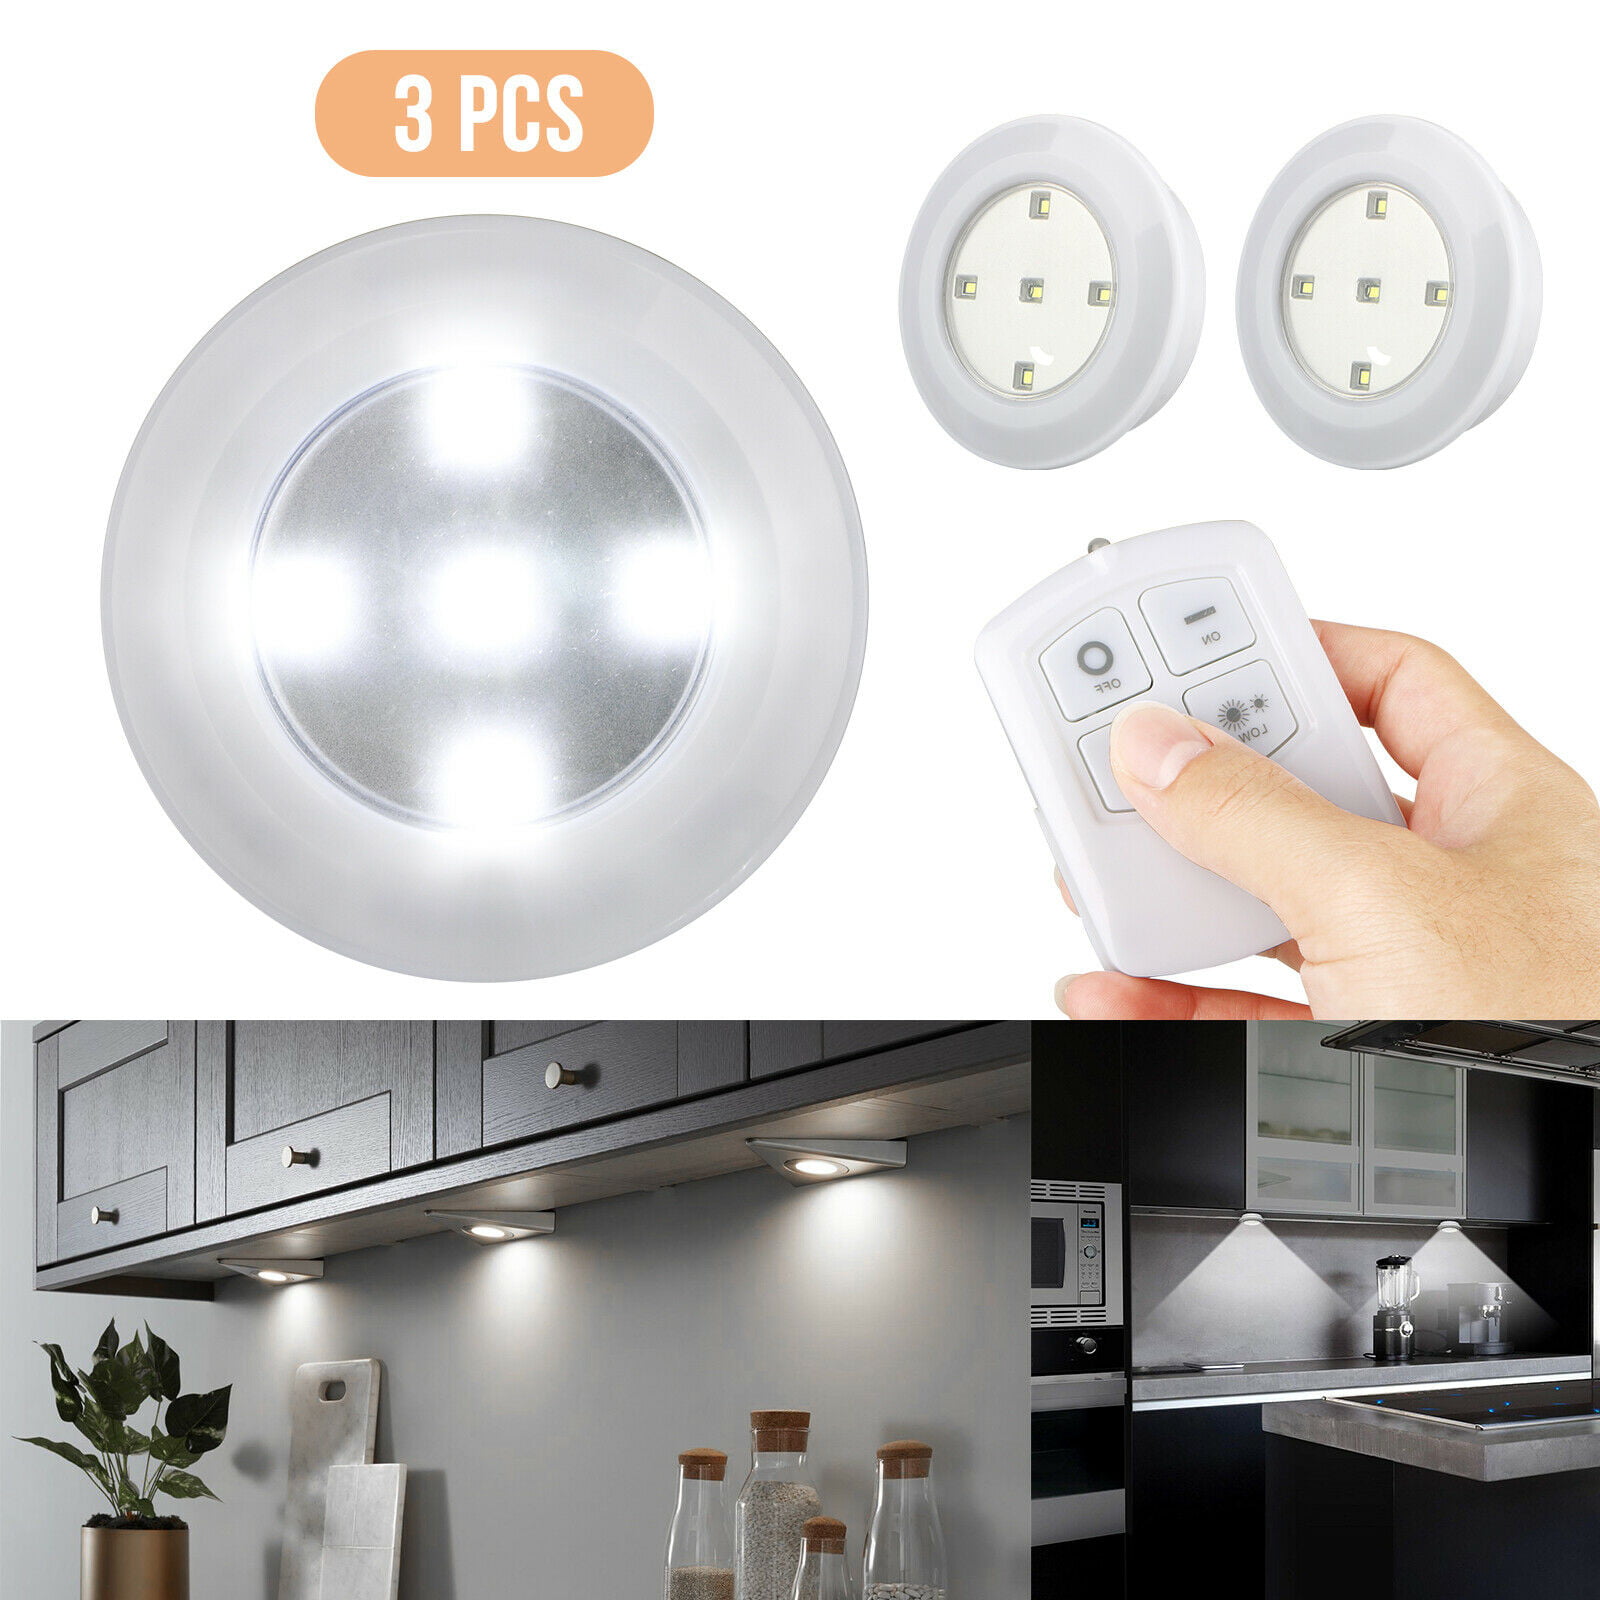 3PCS LED Puck Light With Remote Control Under Cabinet Lights for Kitchen Counter 